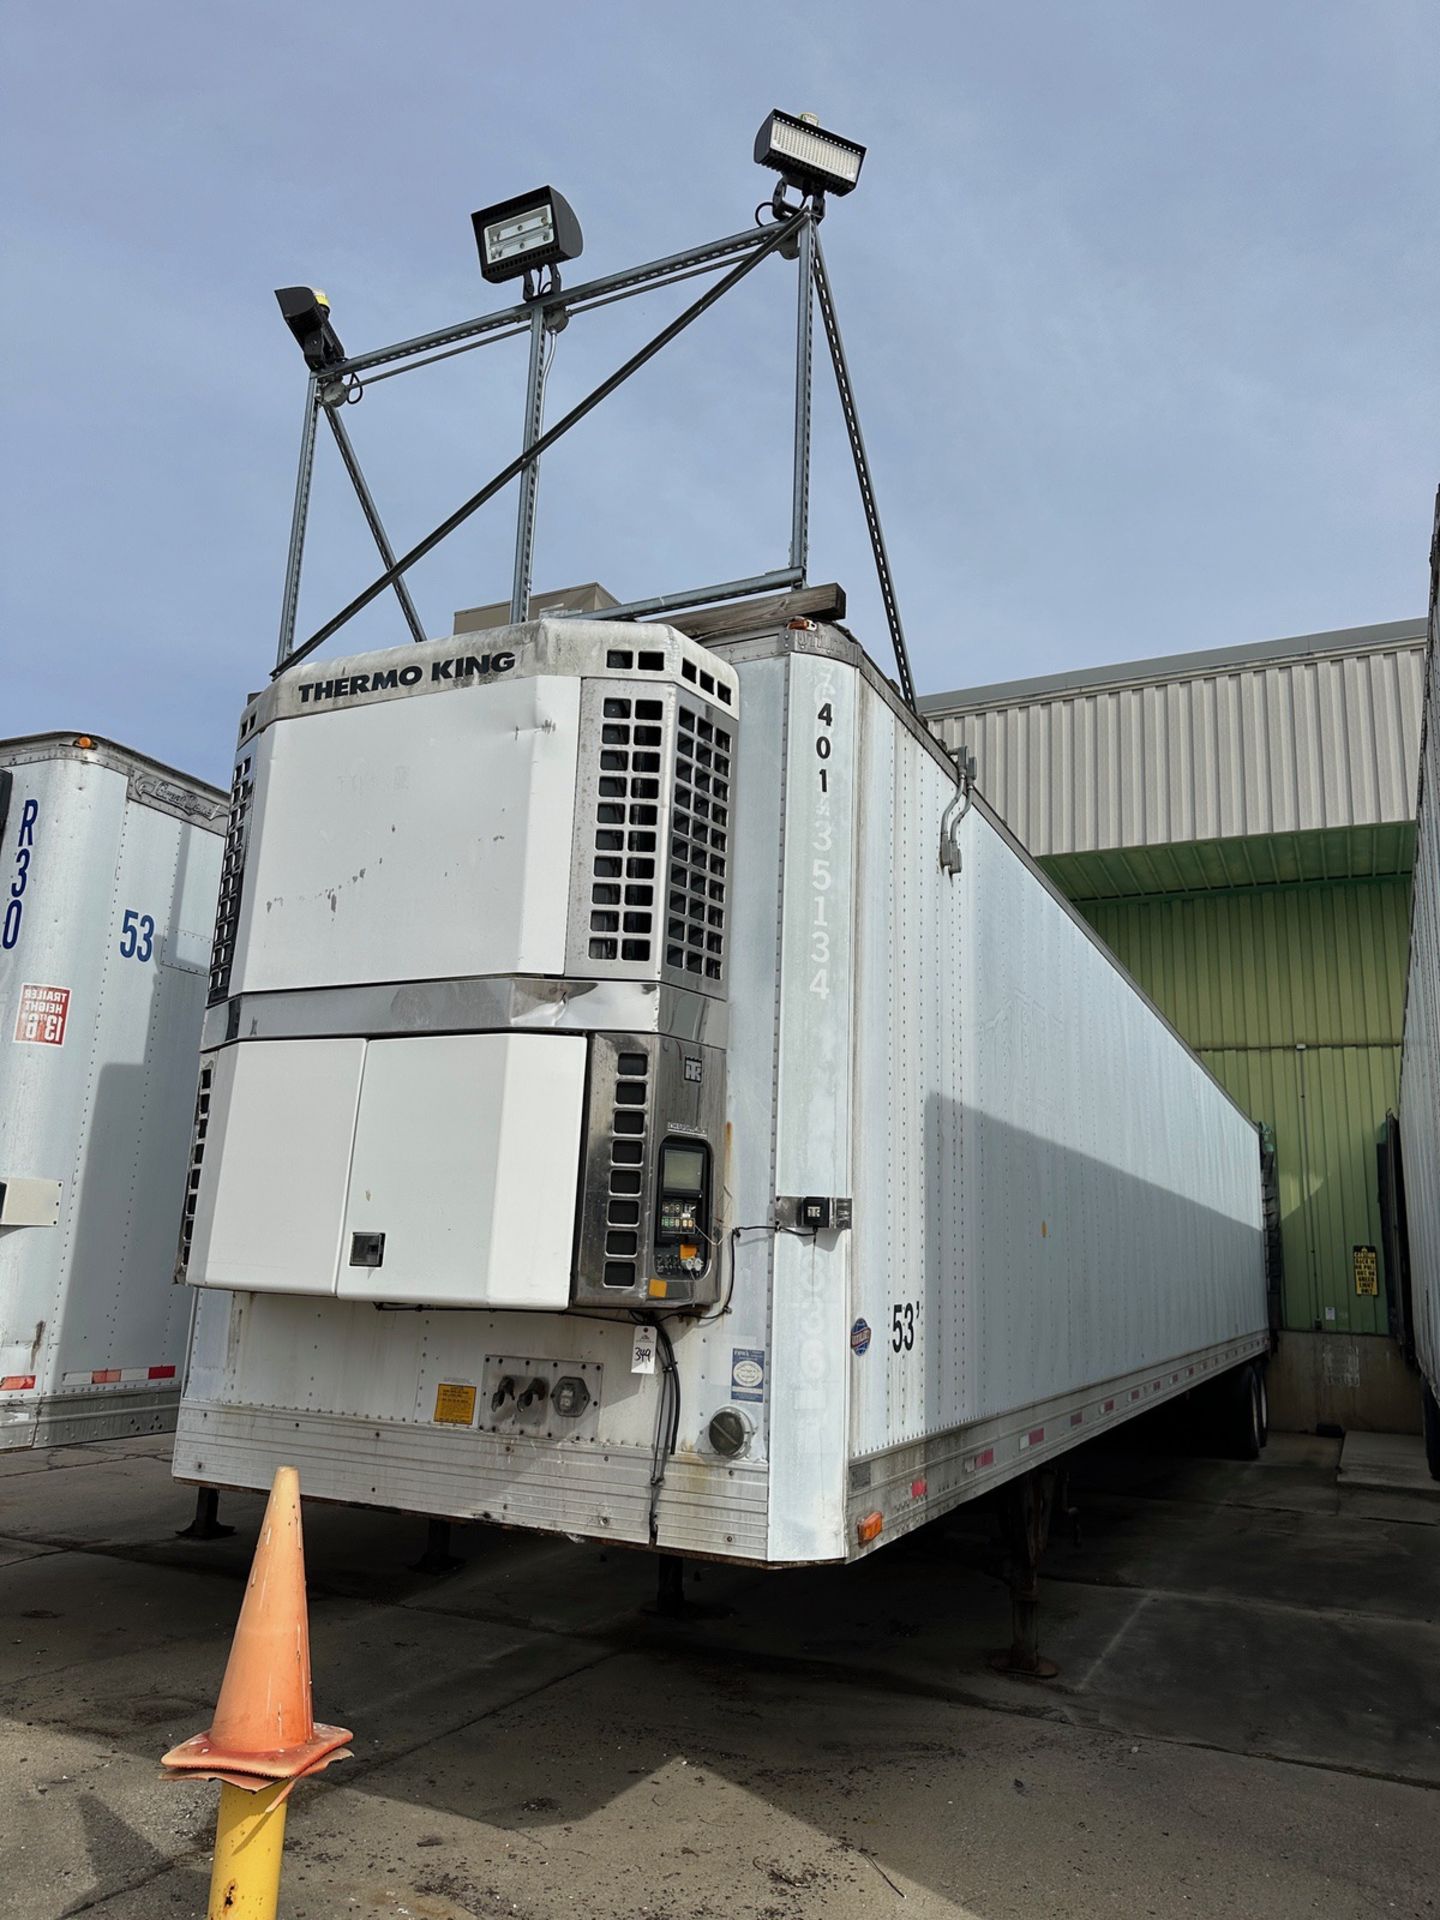 Utility Trailer 53' Reefer Trailer with Added Cooling Units | Rig Fee $125